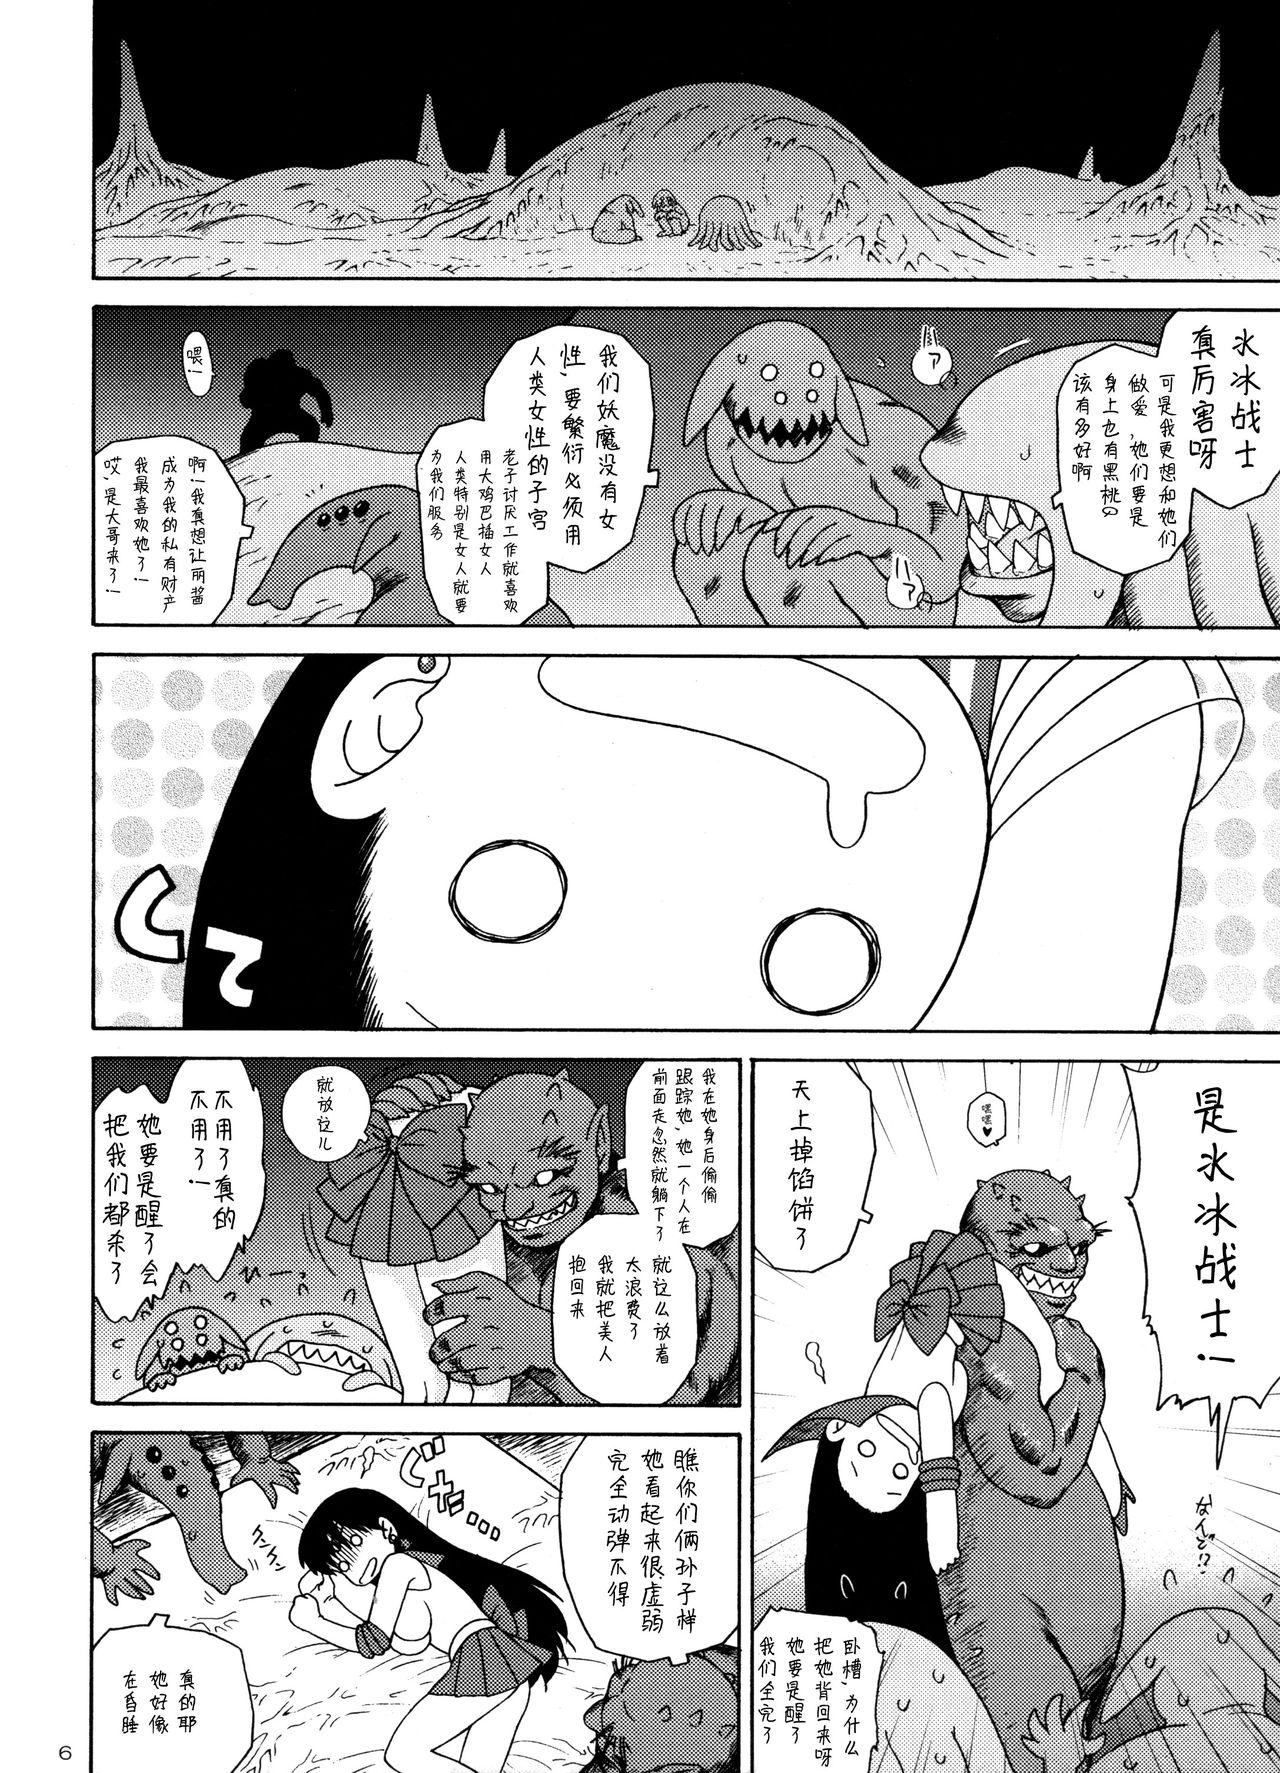 Anal Gape QUEEN OF SPADES - 黑桃皇后 - Sailor moon Girls - Page 9